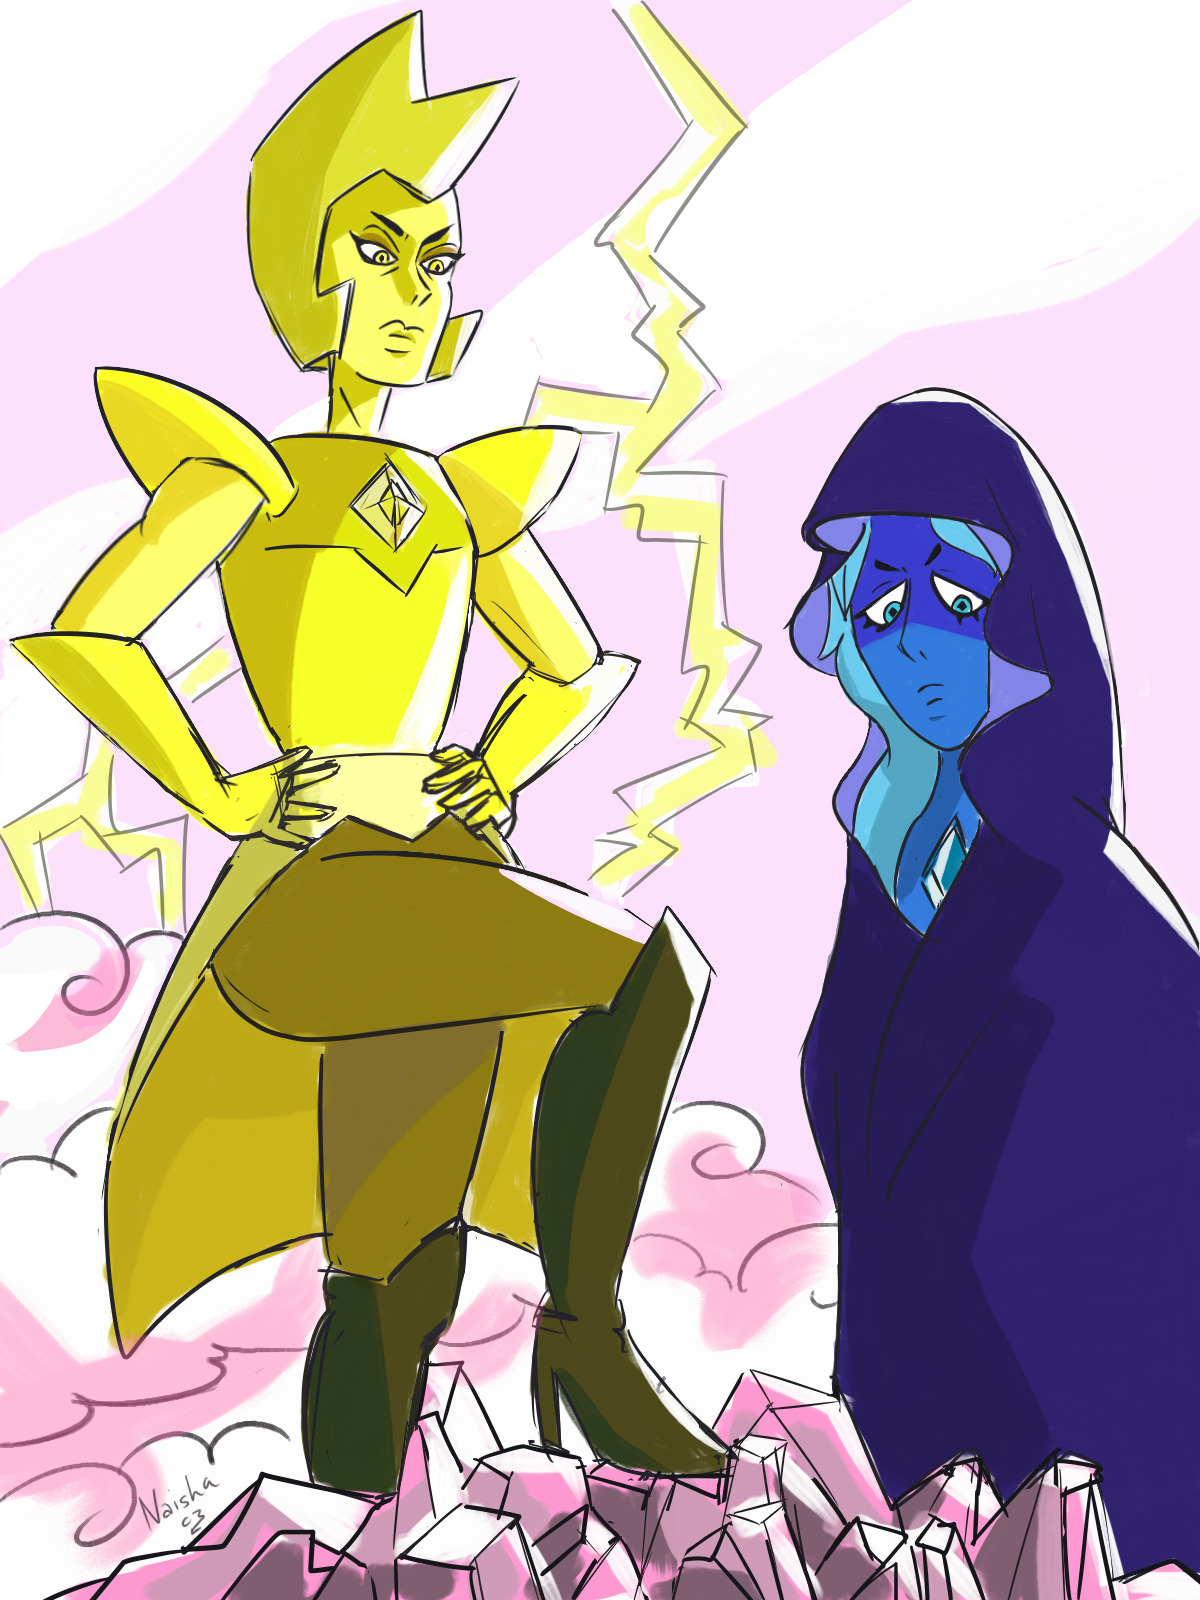 I can’t wait to see the new episodes ! Those two diamonds seemed so angry in the teaser >:D